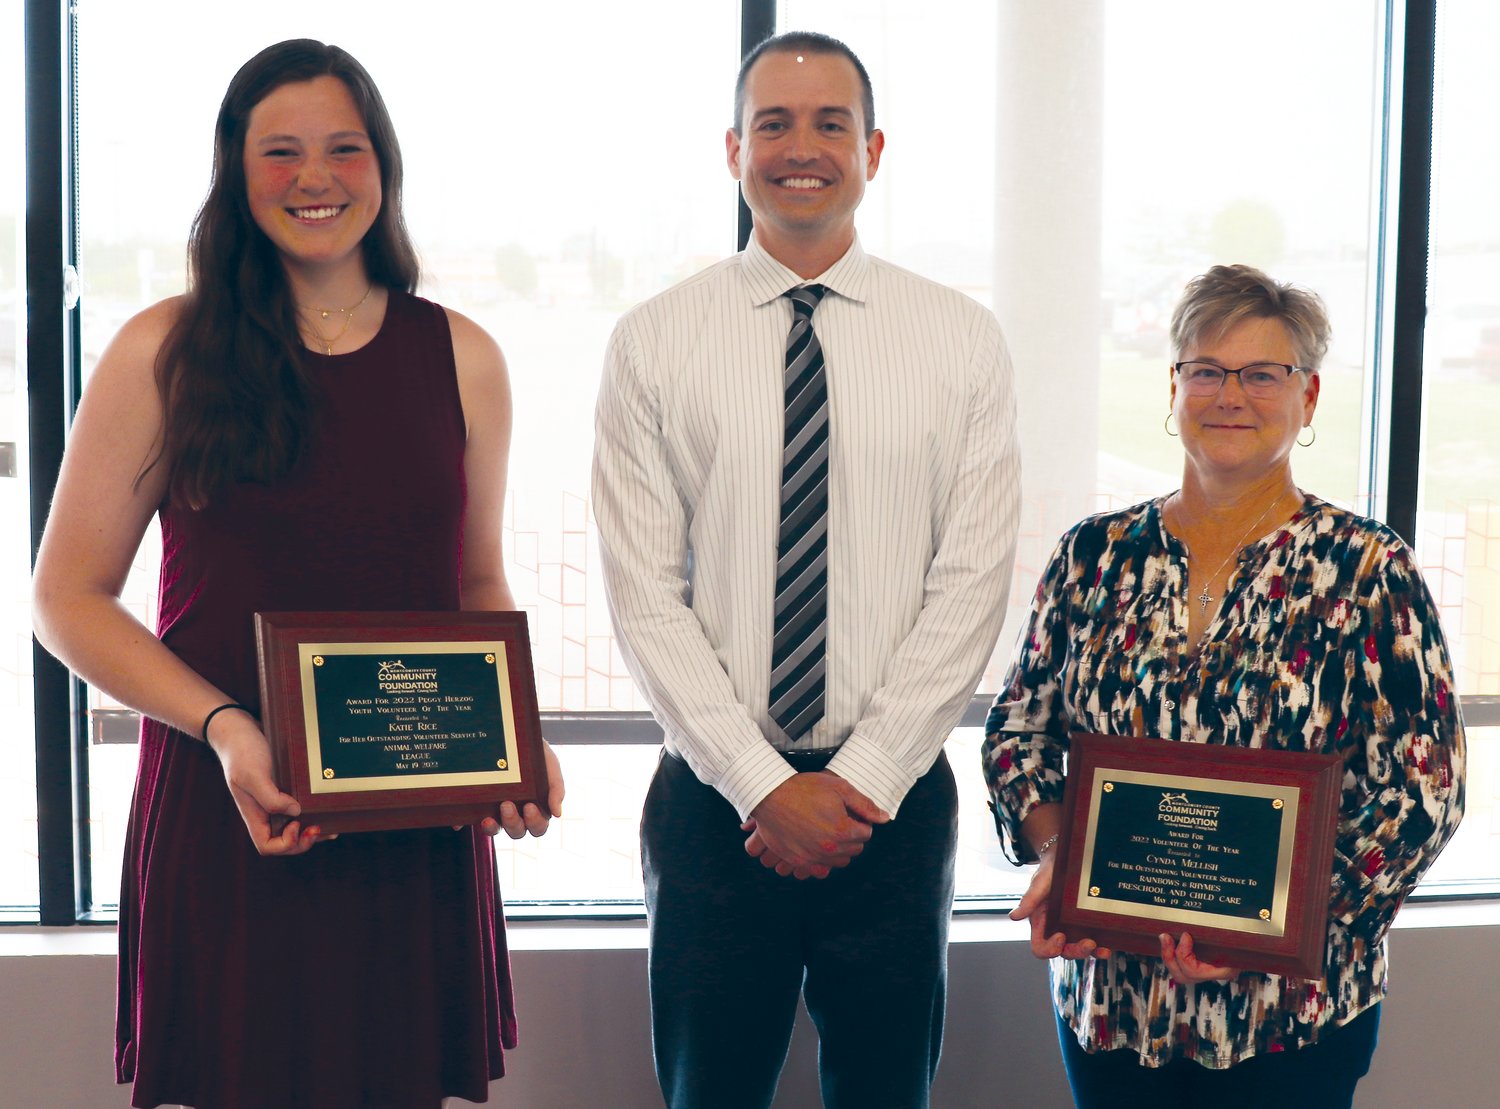 Torey Rauch, center, outgoing Montgomery County Community Foundation board president, poses with Cynda Mellish, the 2022 MCCF Volunteer of the Year, right, and Katie Rice, the 2022 Peggy Herzog Youth Volunteer of the Year.